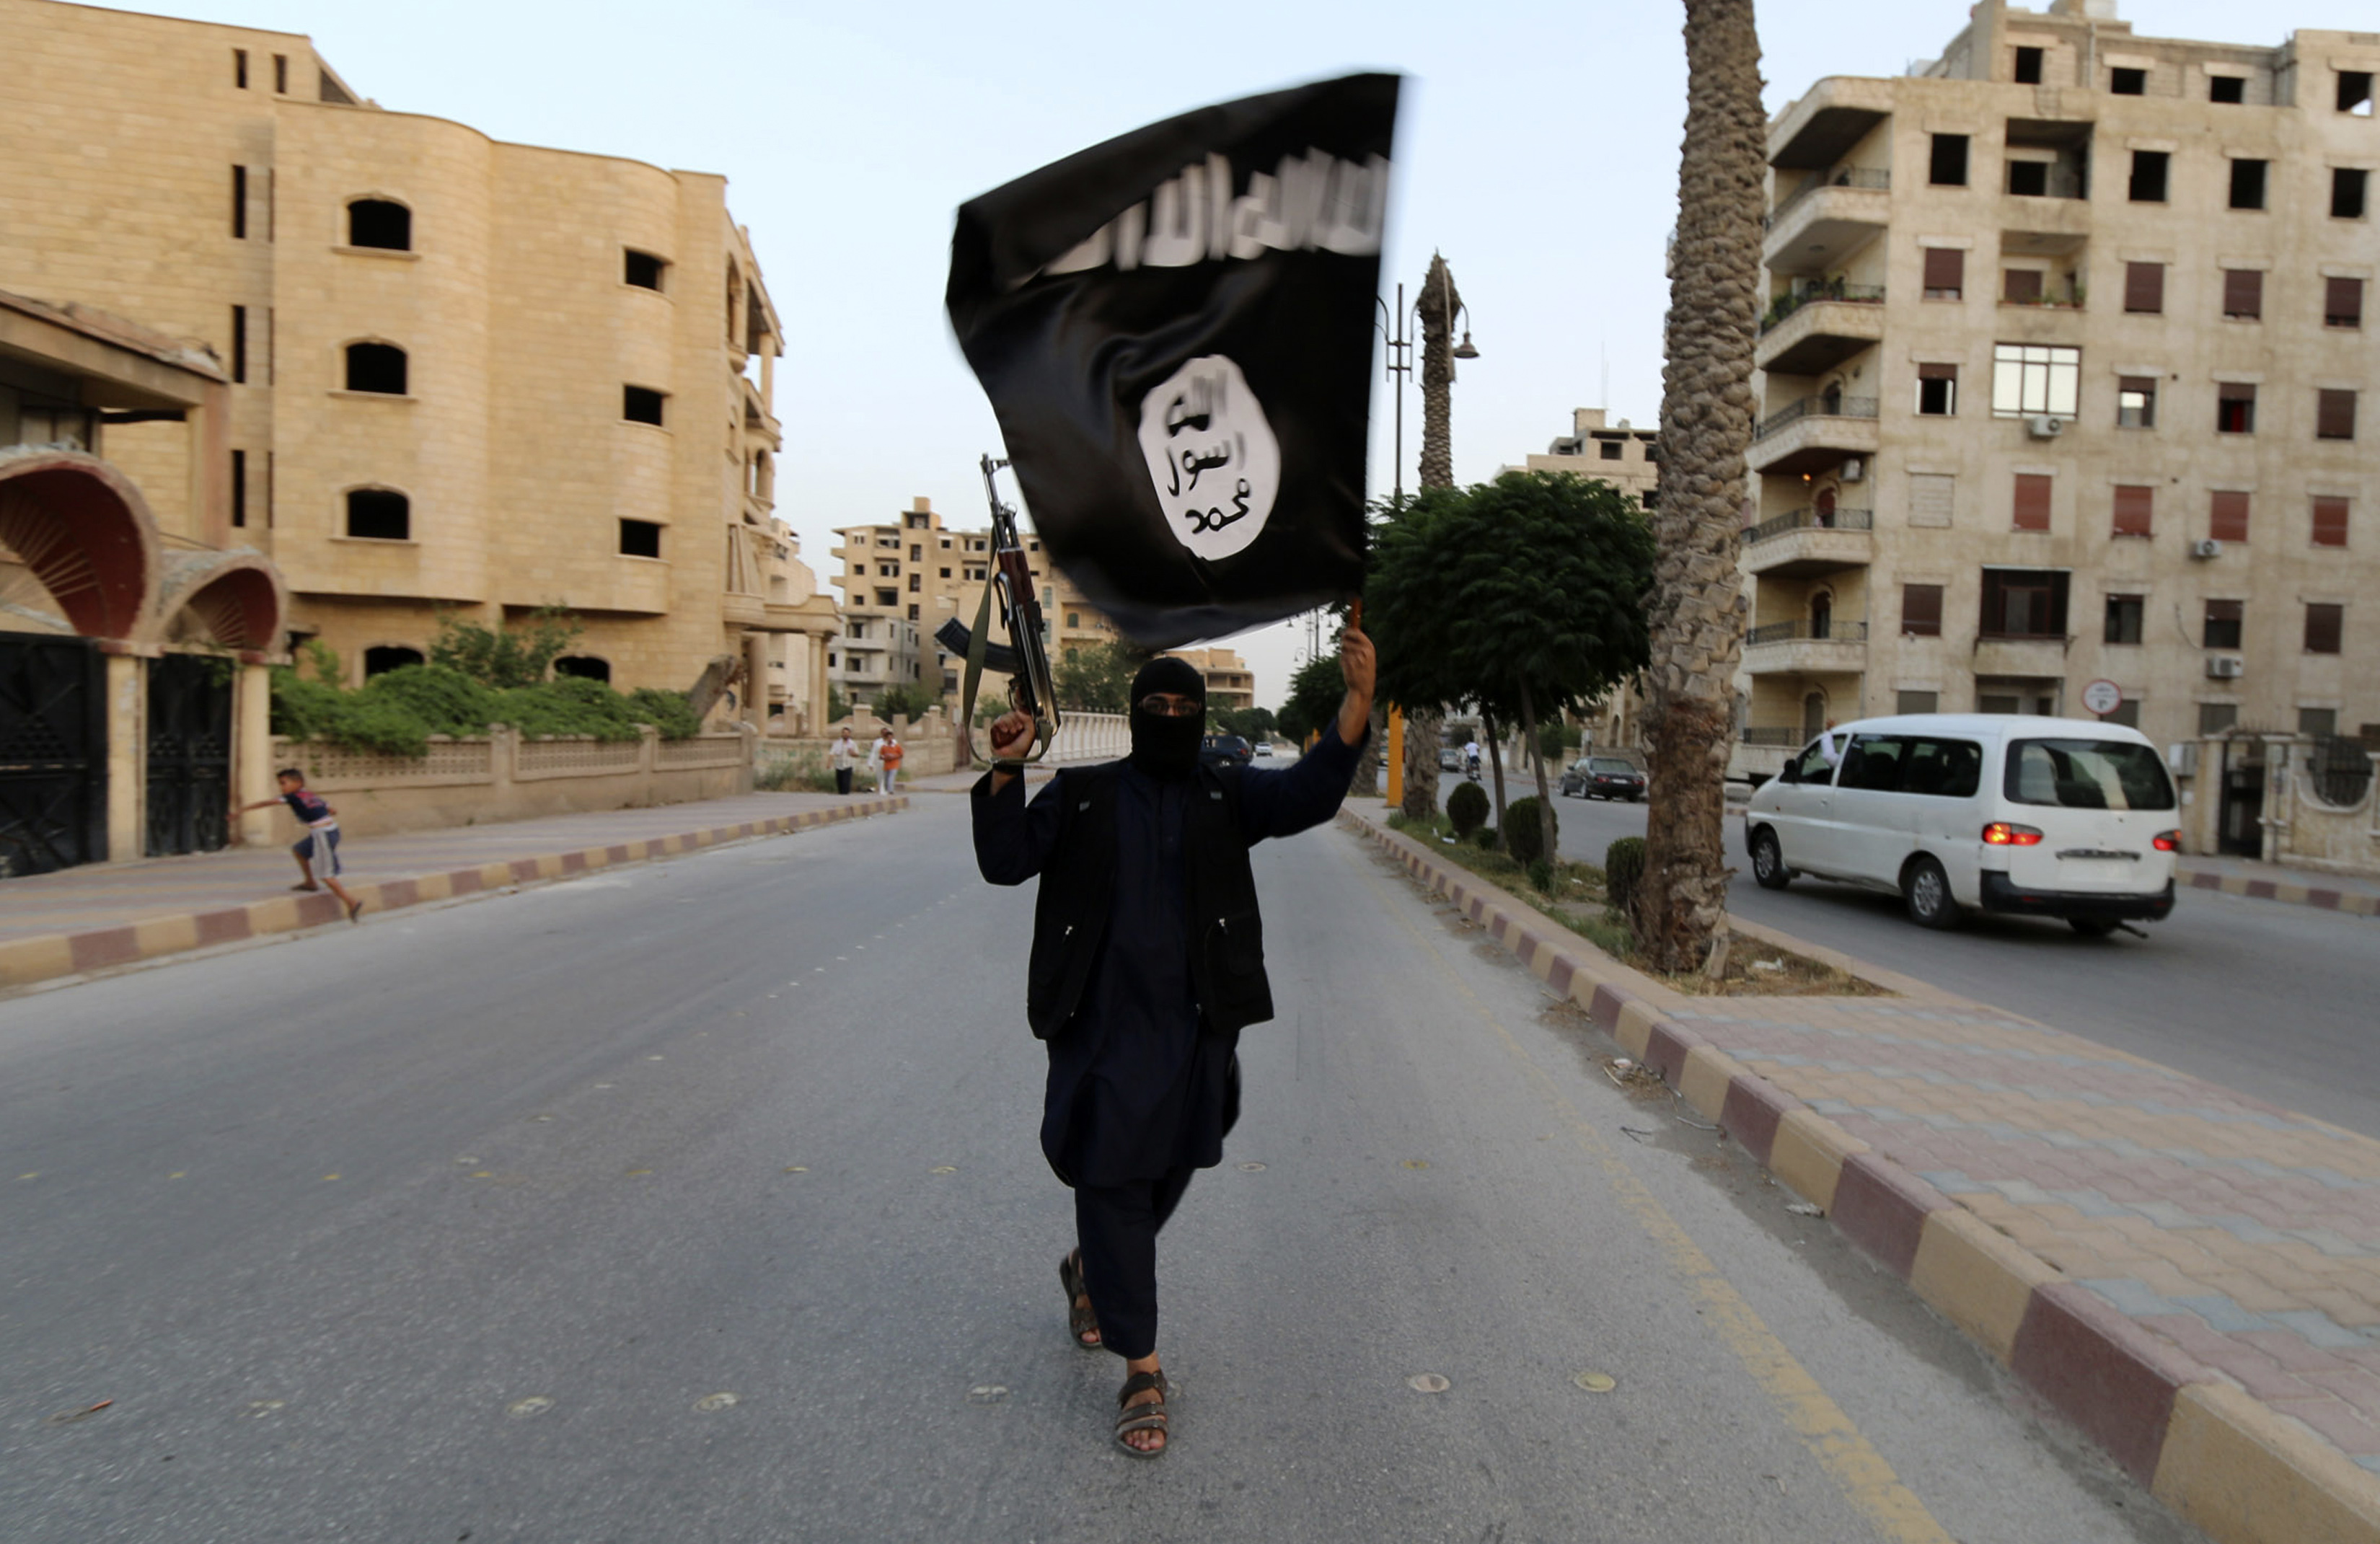 A fighter from the Islamic State in Iraq and Greater Syria (ISIS) waves a flag in Raqqa, Syria on June 29, 2014. (Reuters)